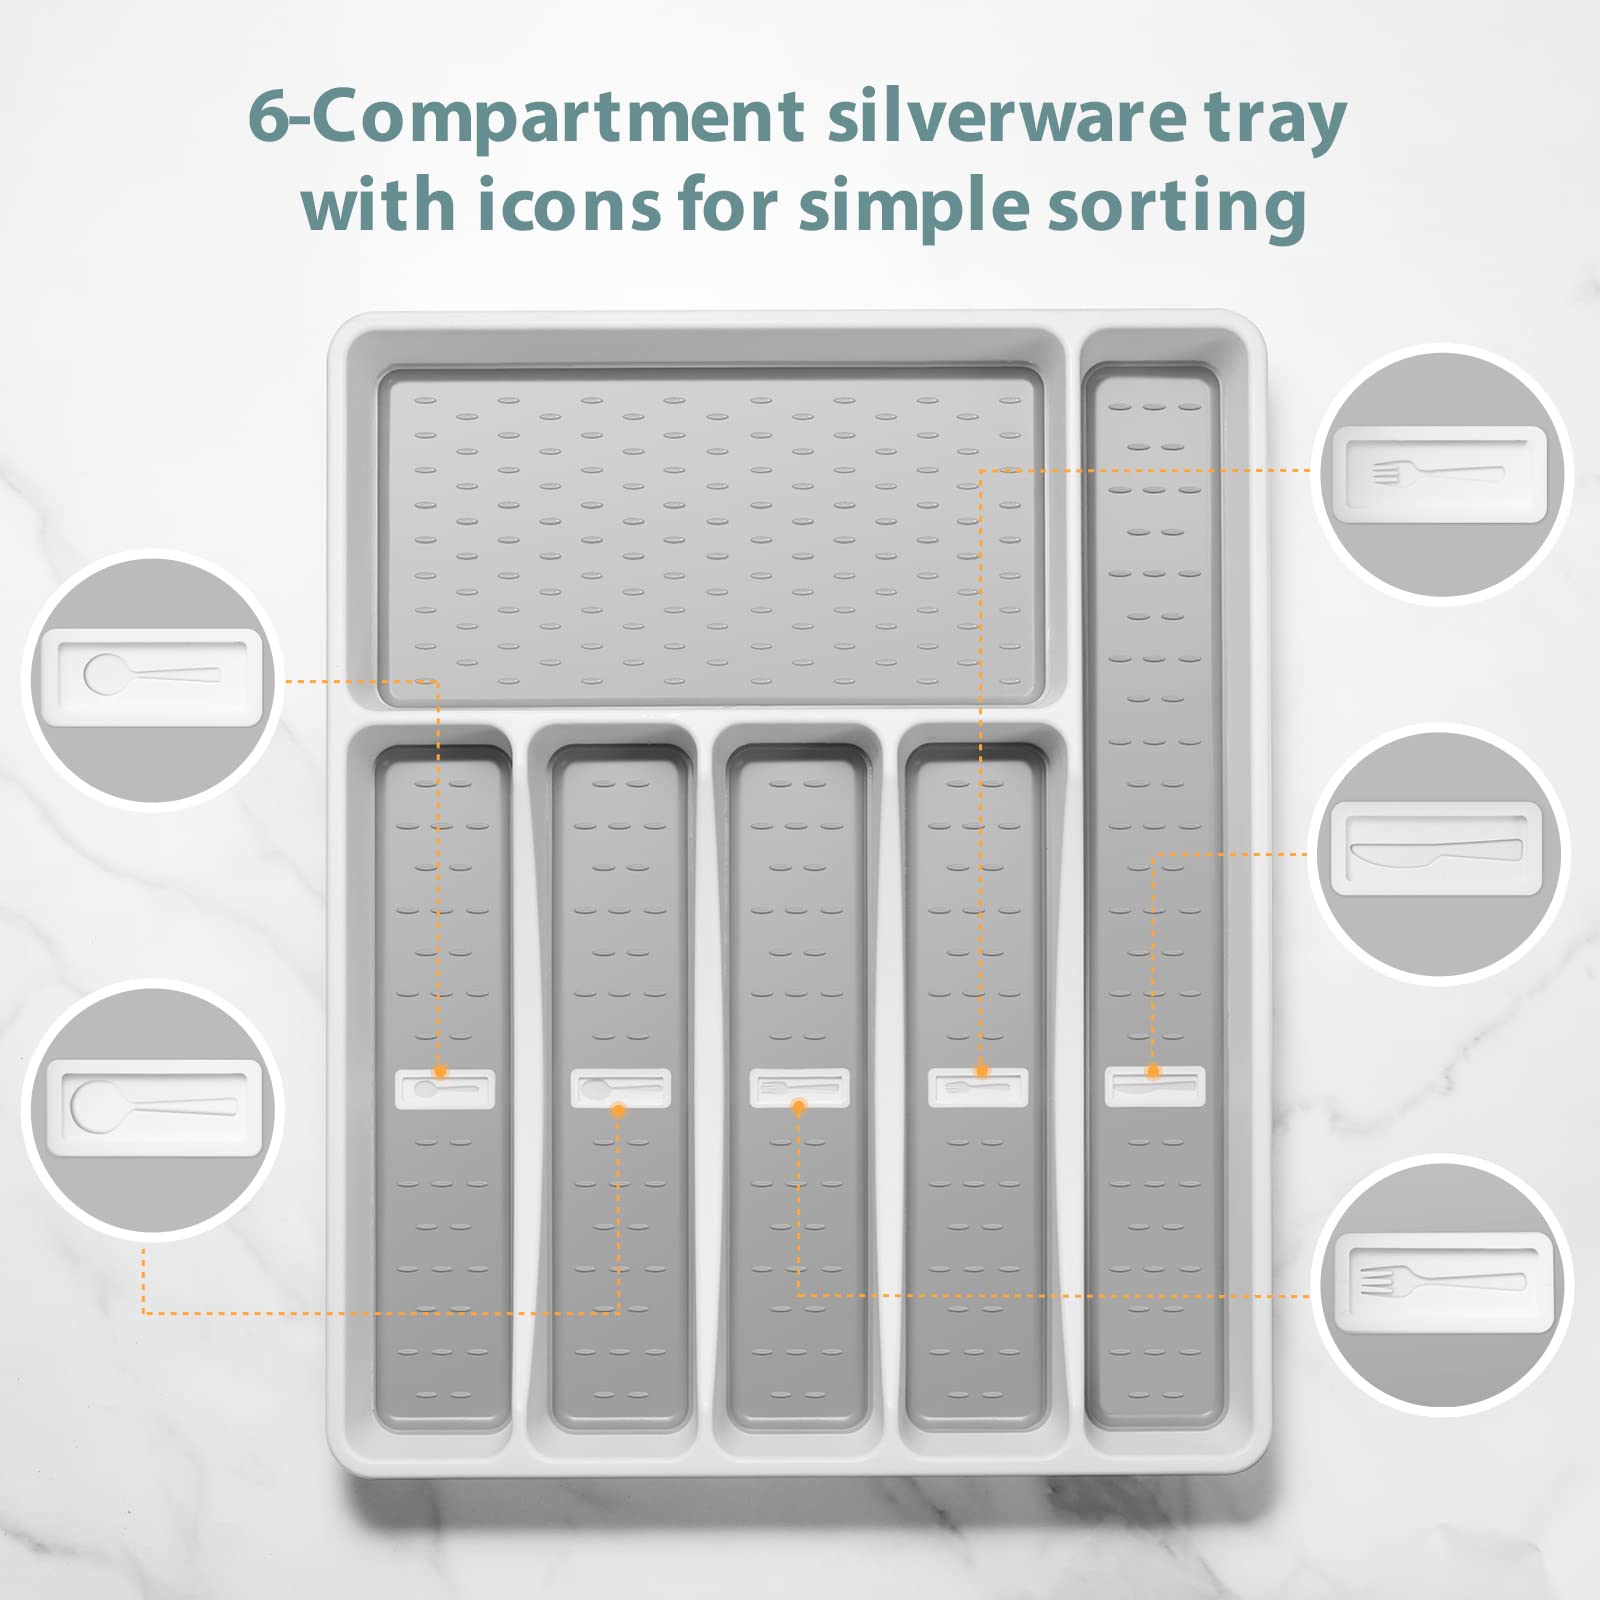 Joequality Silverware Organizer with Icons，Plastic Cutlery silverware Tray for Drawer，Utensil Tableware Flatware Organizer for Kitchen with Non-slip TPR,Fits Oversized Drawer,6-Compartment，Grey